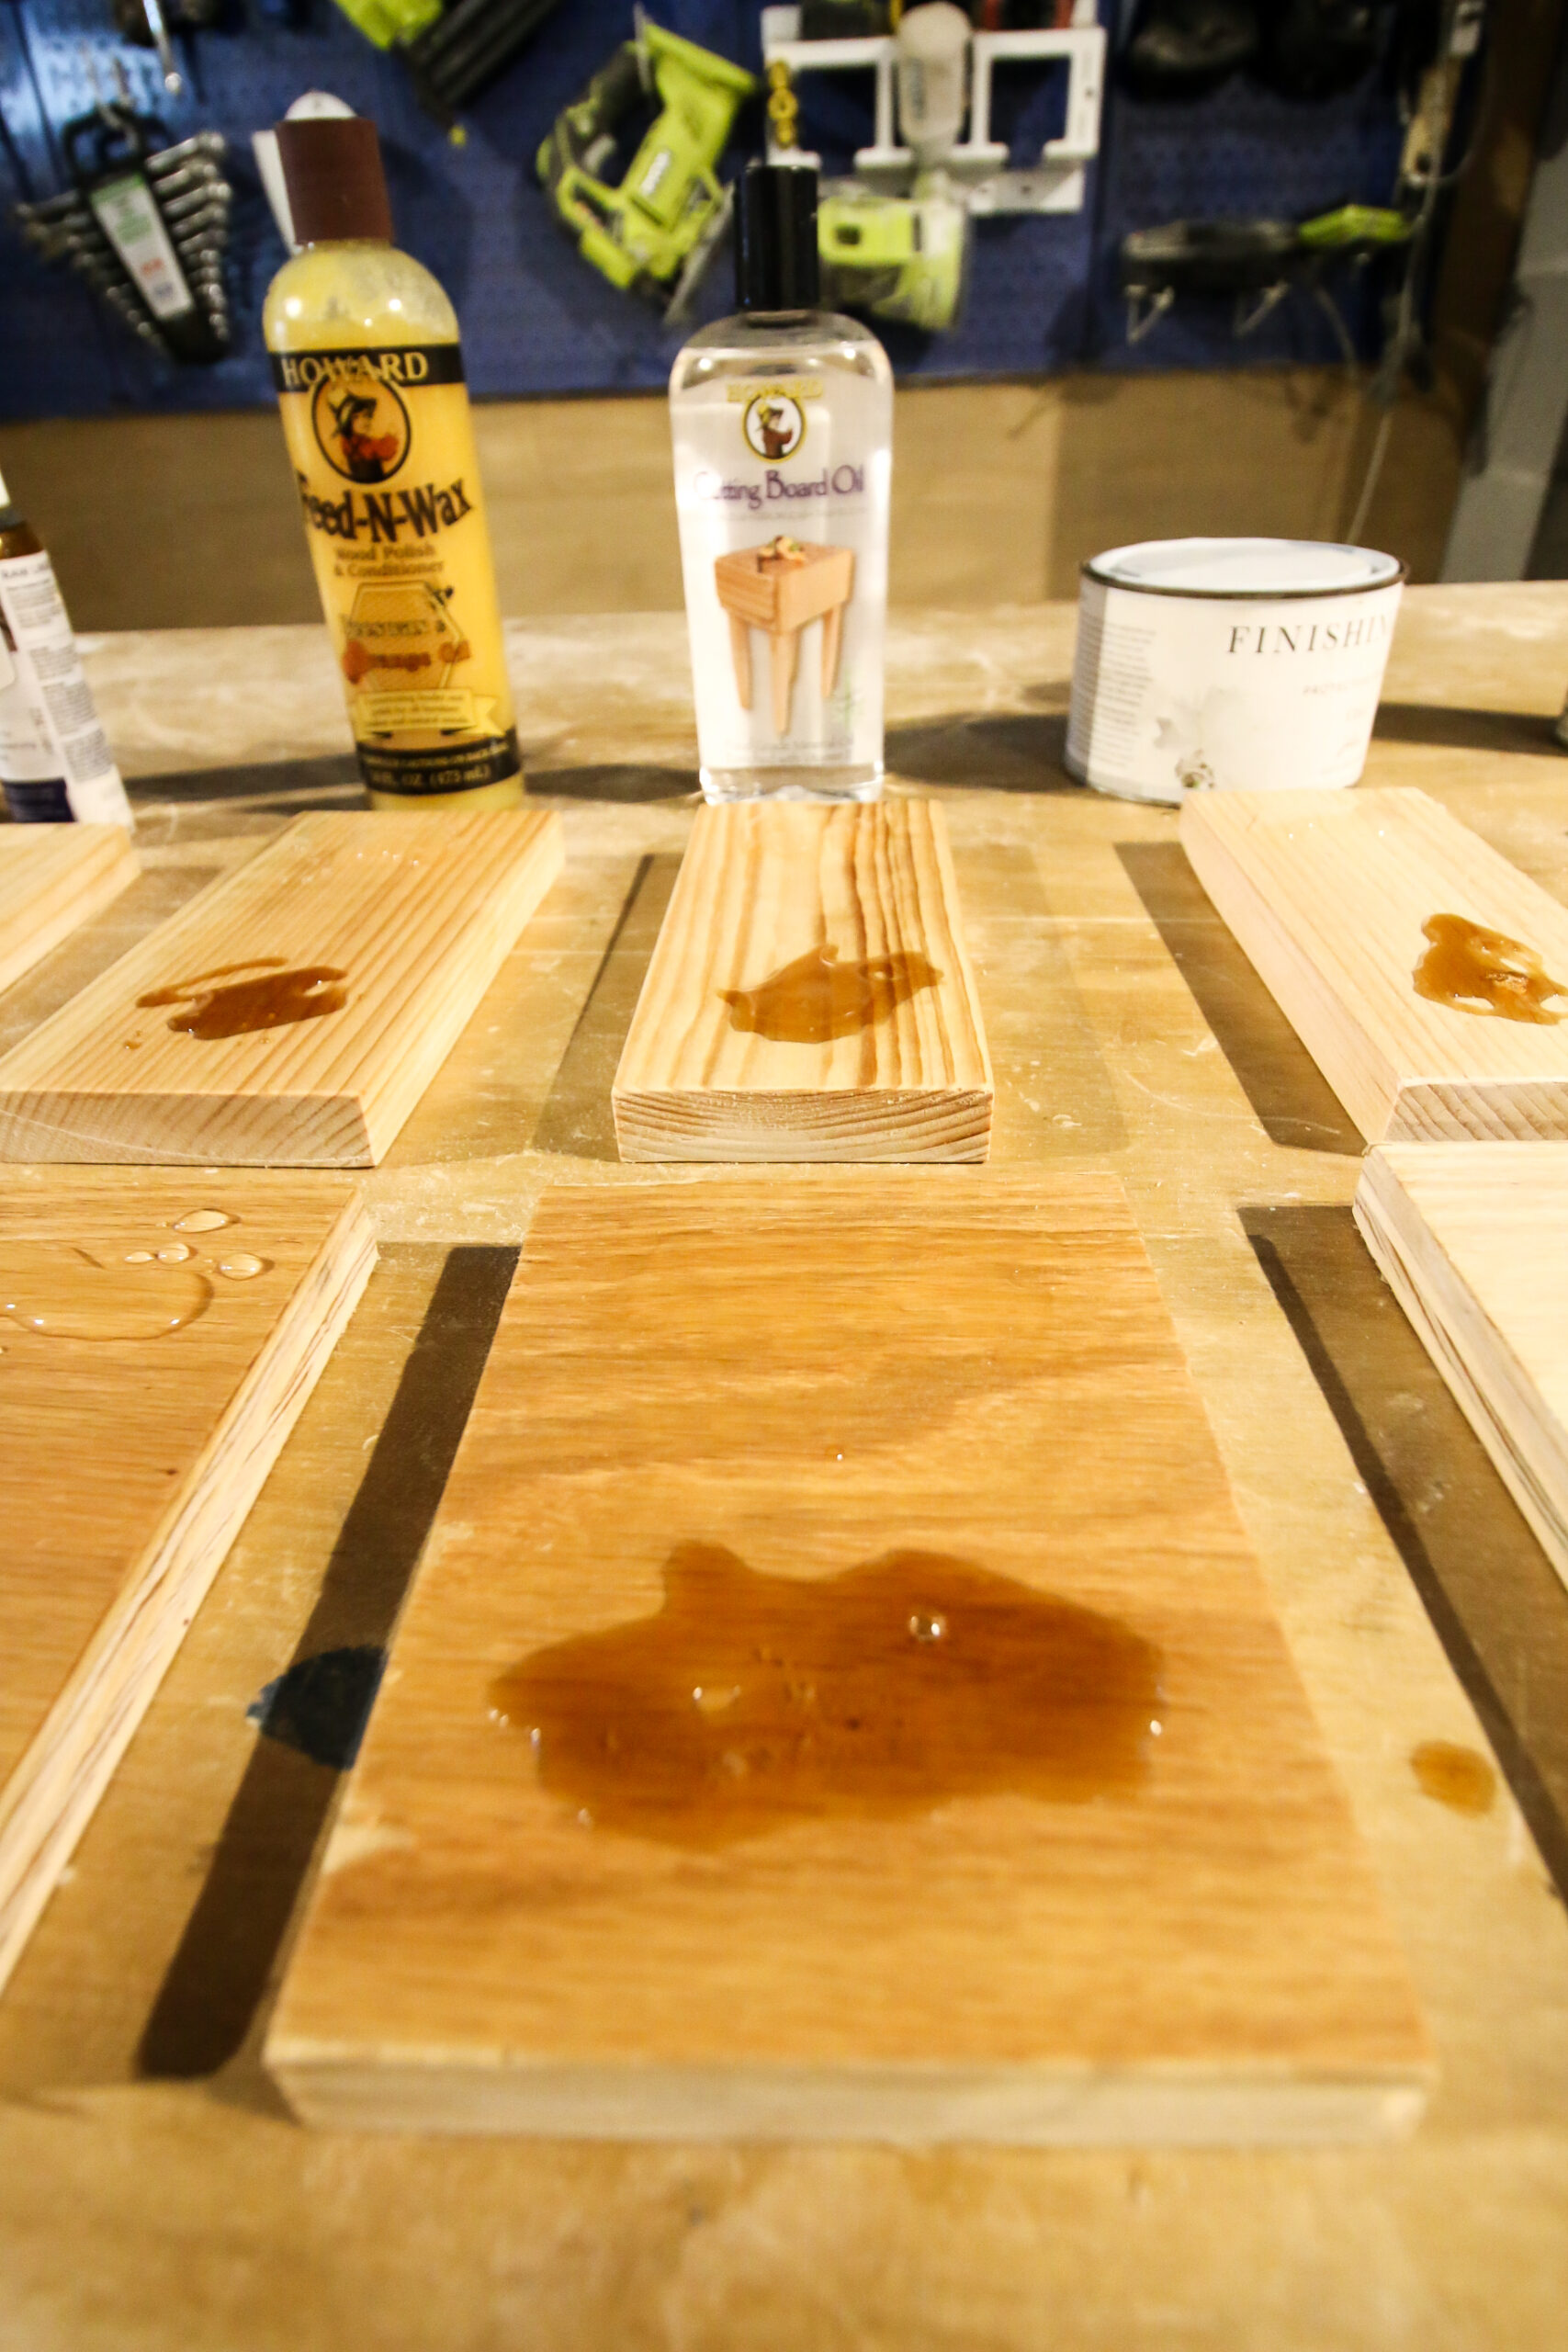 Wax vs Oil for Wood, Which is best for your Project?